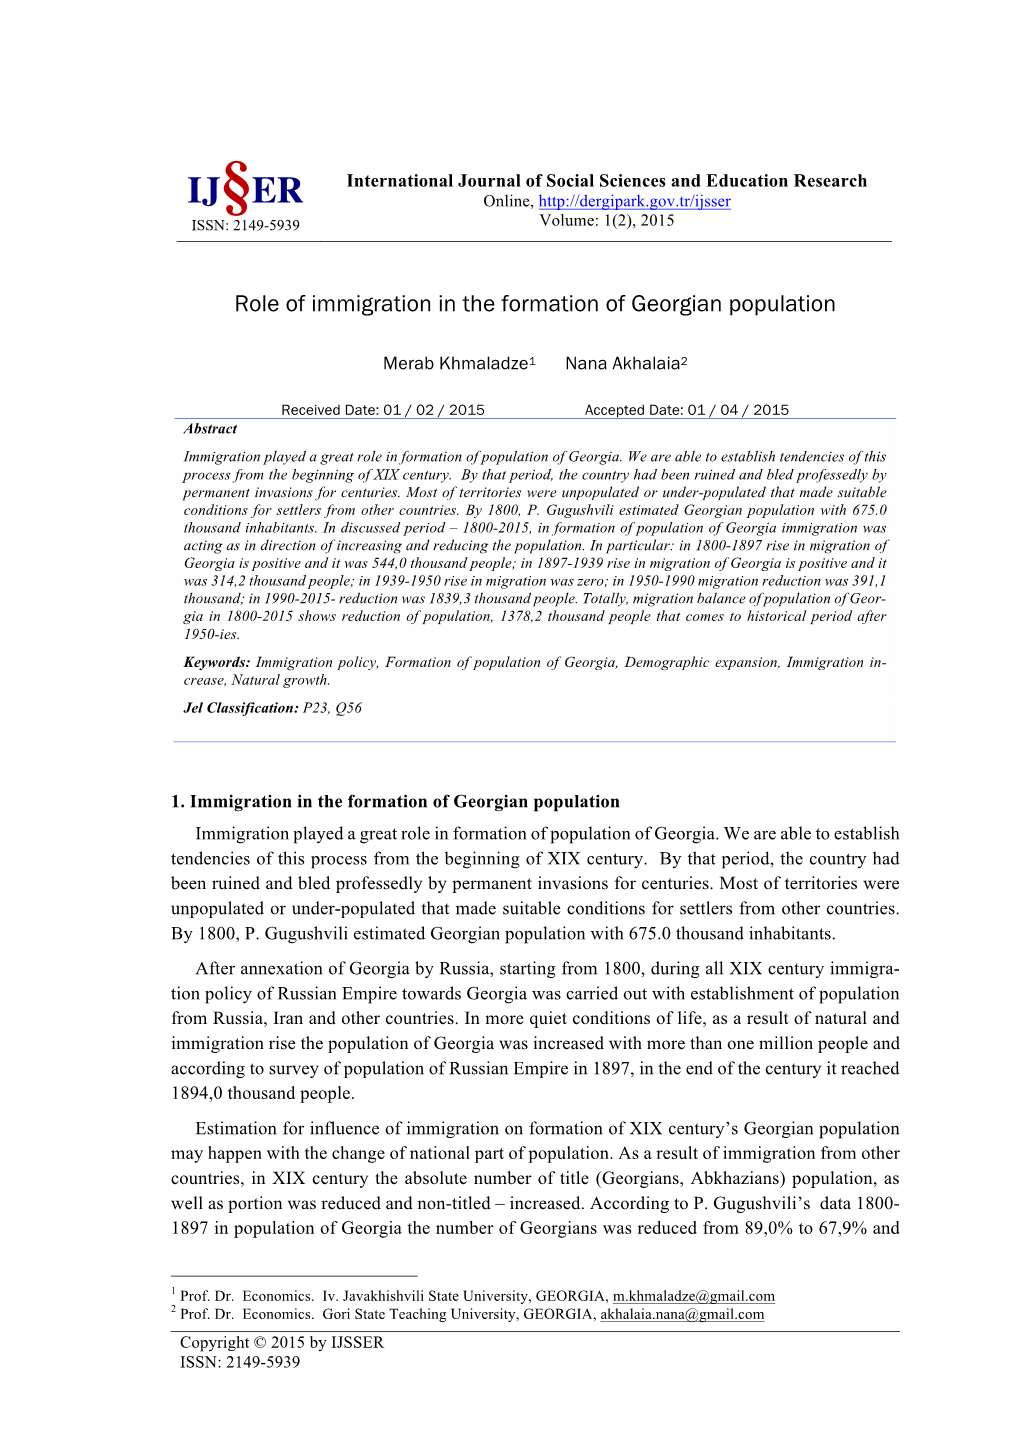 Role of Immigration in the Formation of Georgian Population